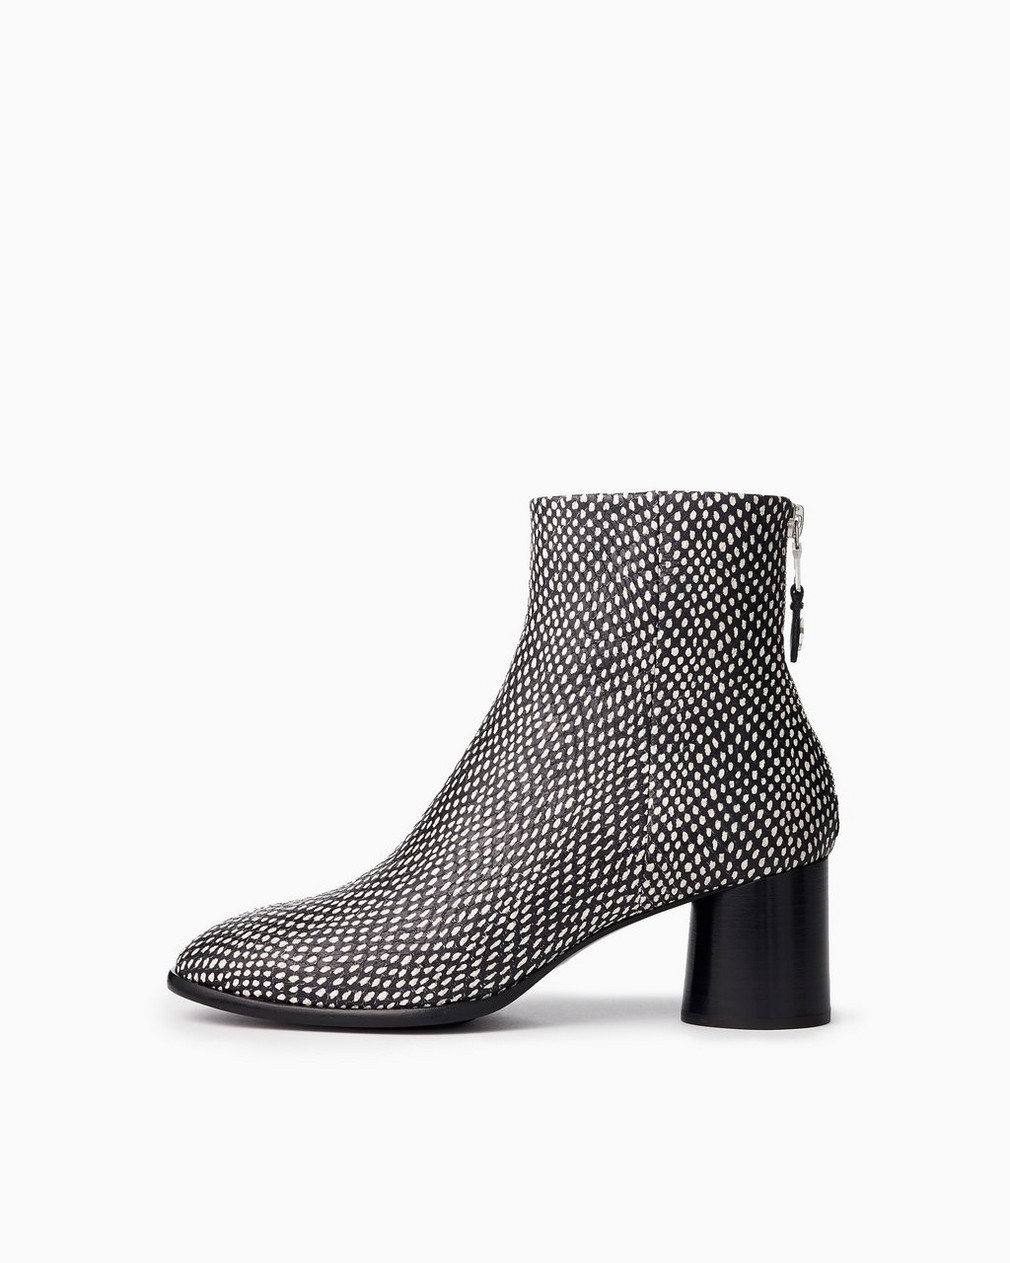 Fleur Boot - Leather